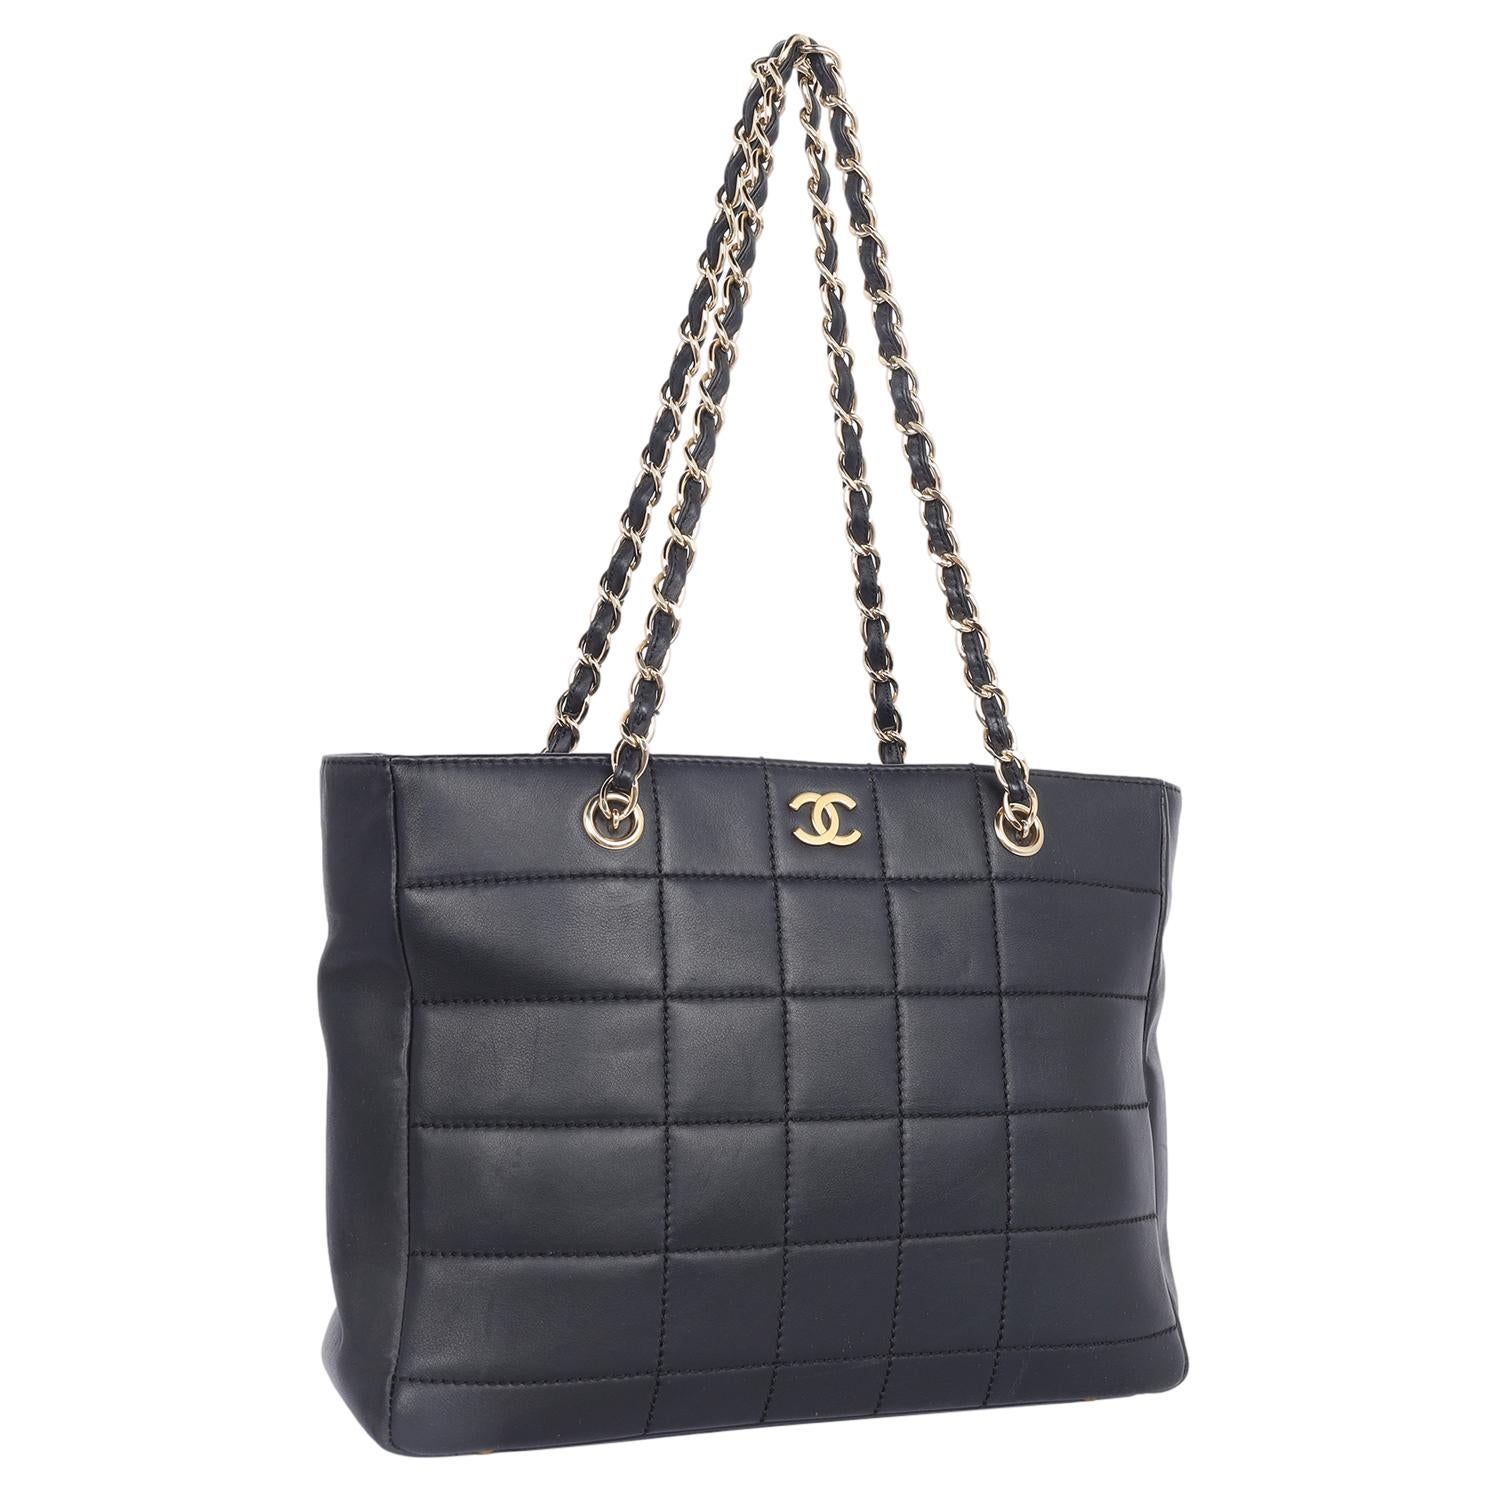 Chanel CC Choco Bar Lambskin Leather Shoulder Bag Black In Good Condition For Sale In Salt Lake Cty, UT